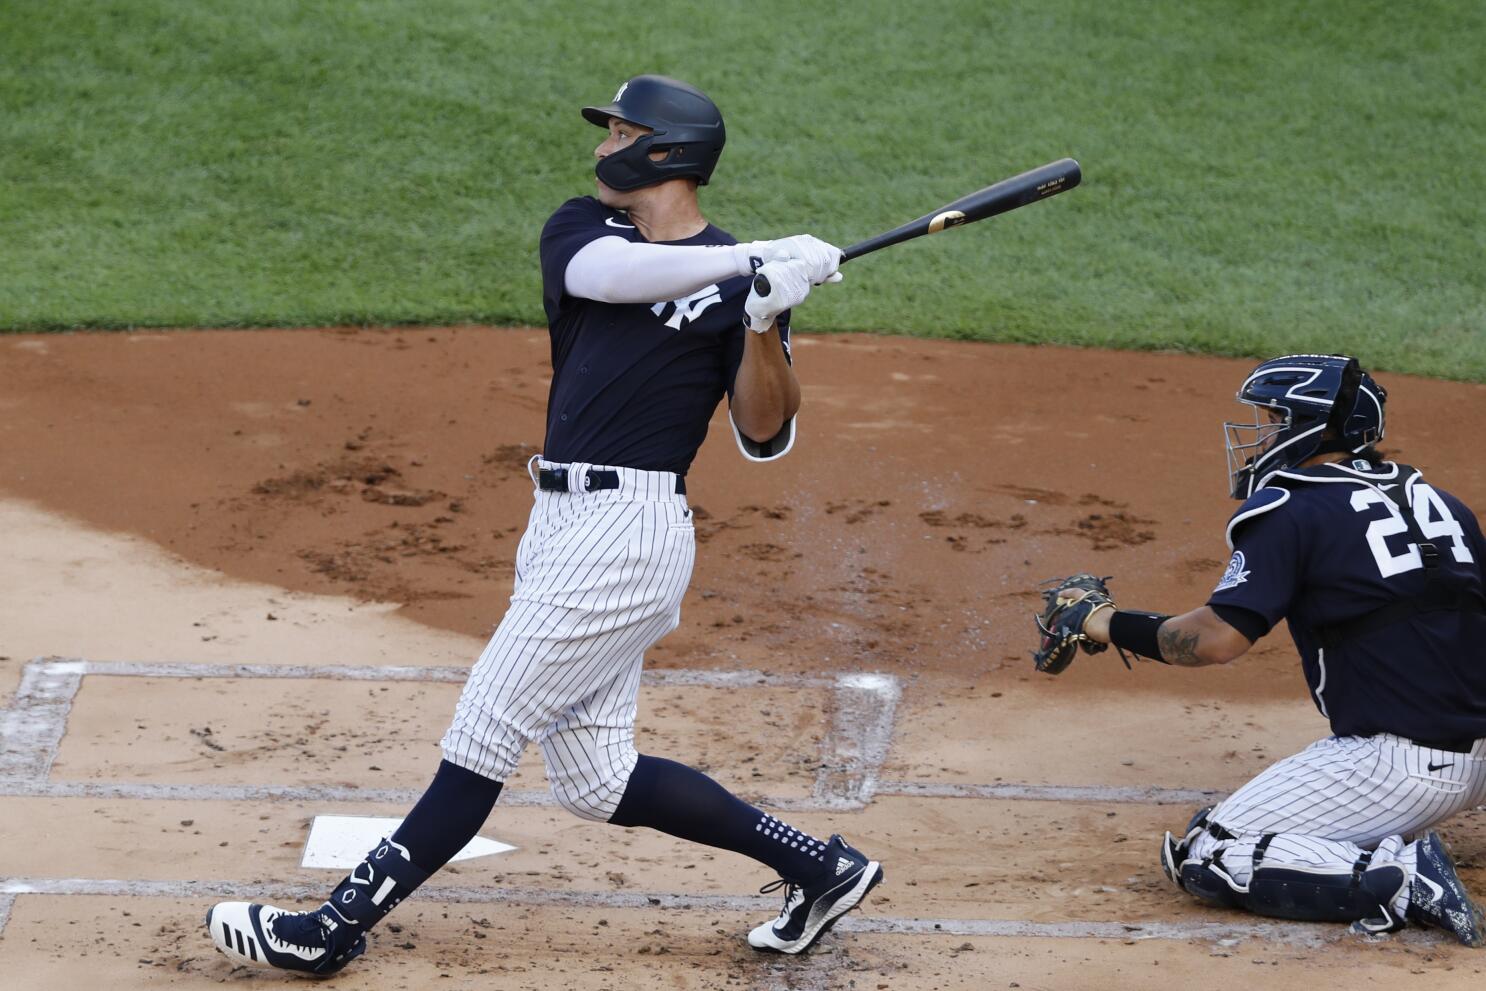 Judge hits 3-run HR in 9th to give Yanks 6-5 win over Jays - The San Diego  Union-Tribune